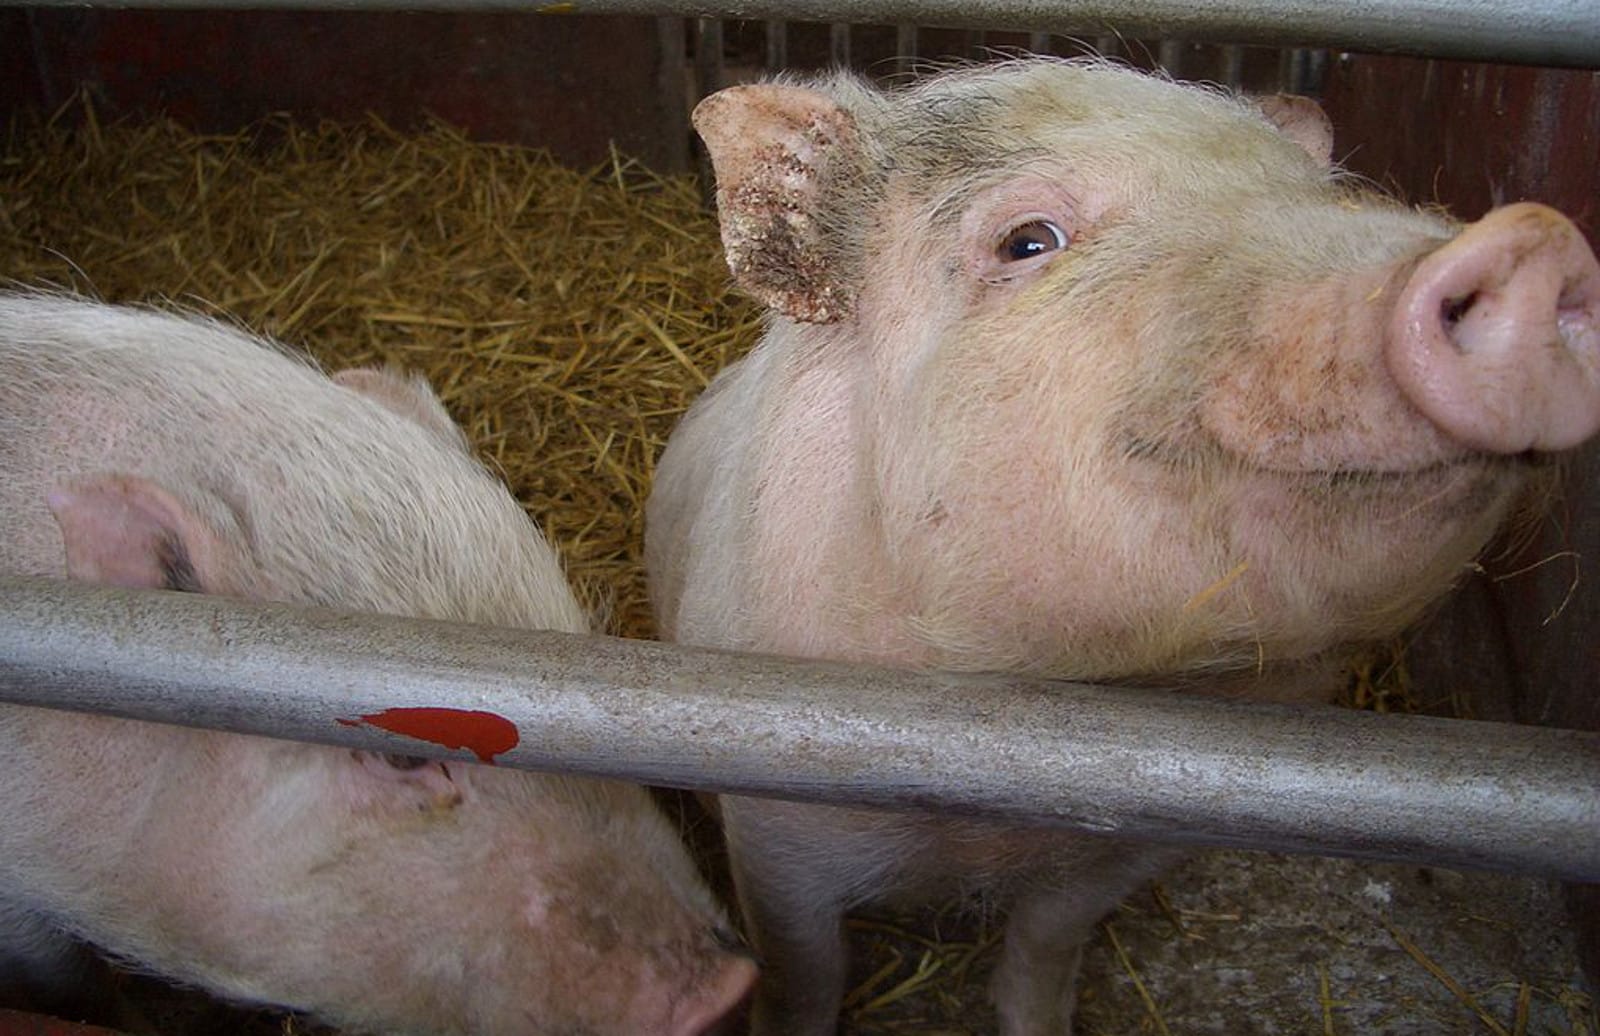 Signs We're Winning the Fight Against Factory Farming